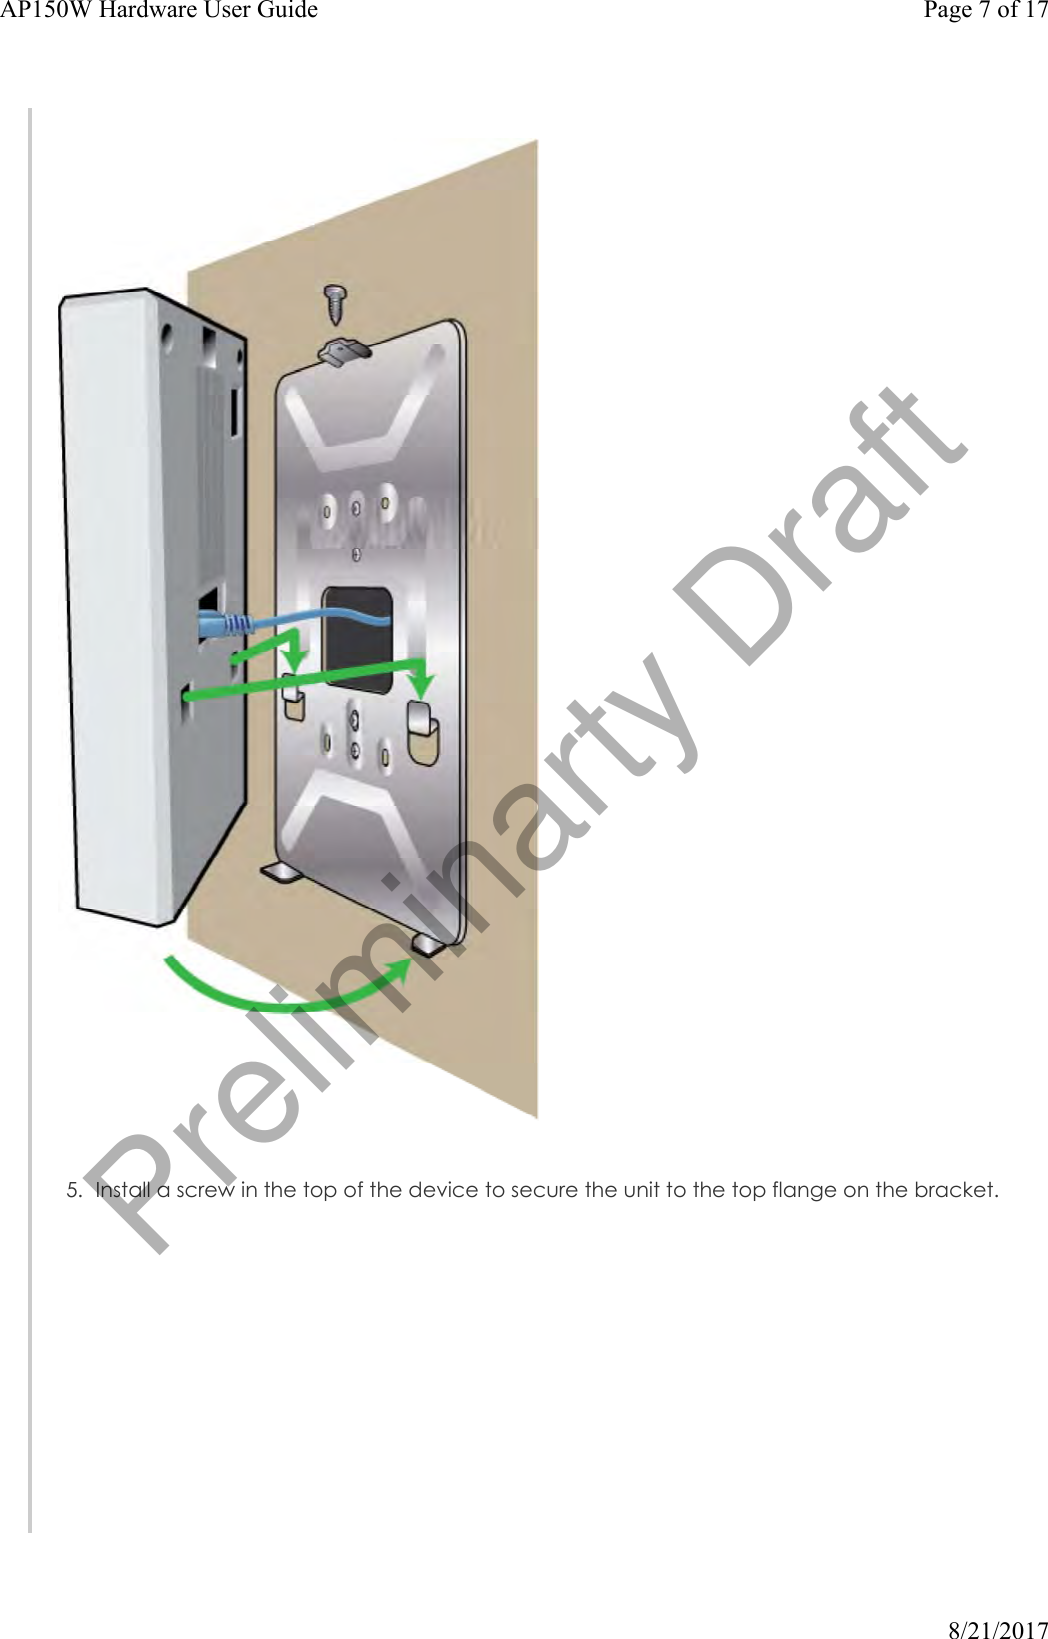 5. Install a screw in the top of the device to secure the unit to the top flange on the bracket.Page 7 of 17AP150W Hardware User Guide8/21/2017Preliminarty Draft